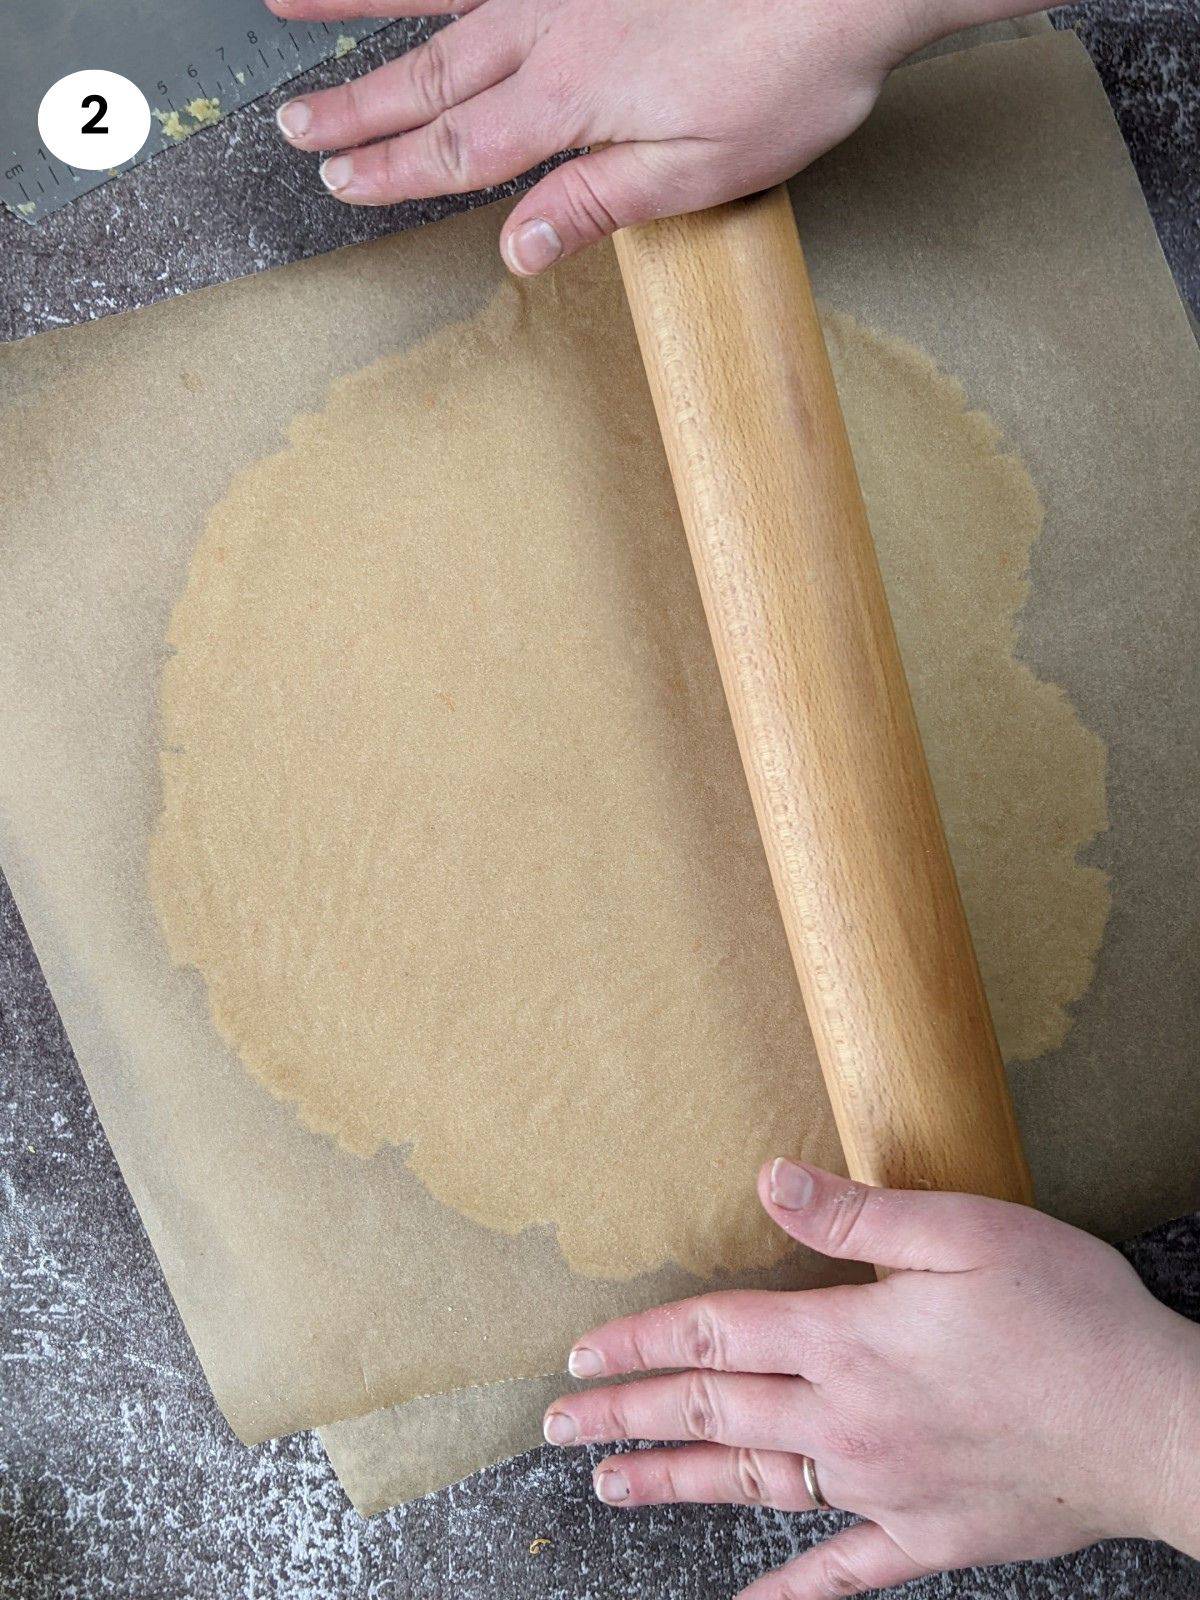 Rolling the dough into a circle between parchment paper